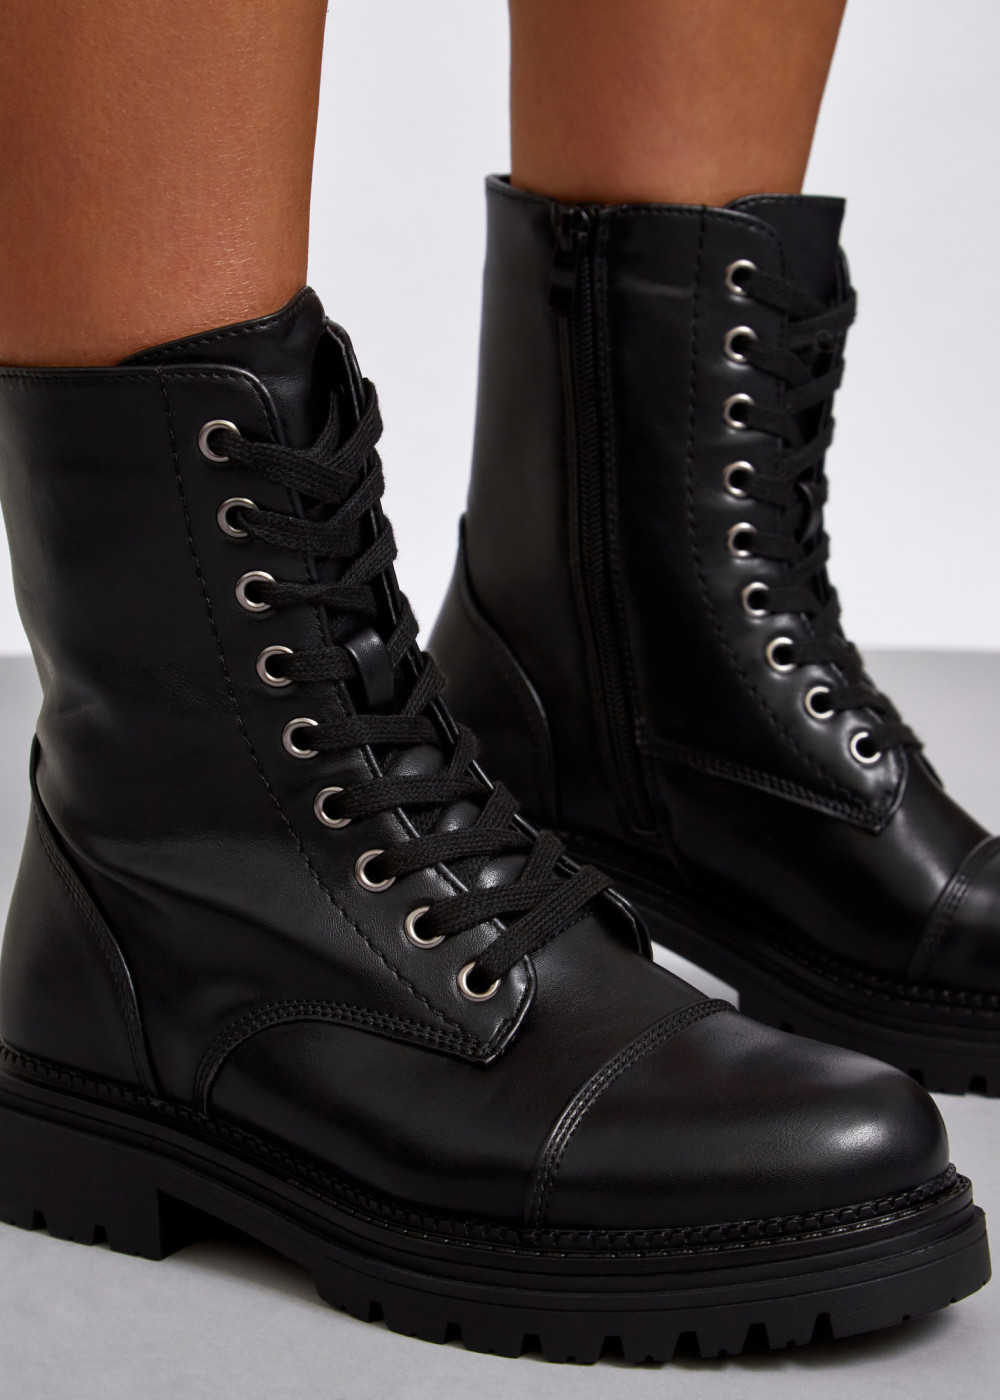 Black lace up ankle boots 2